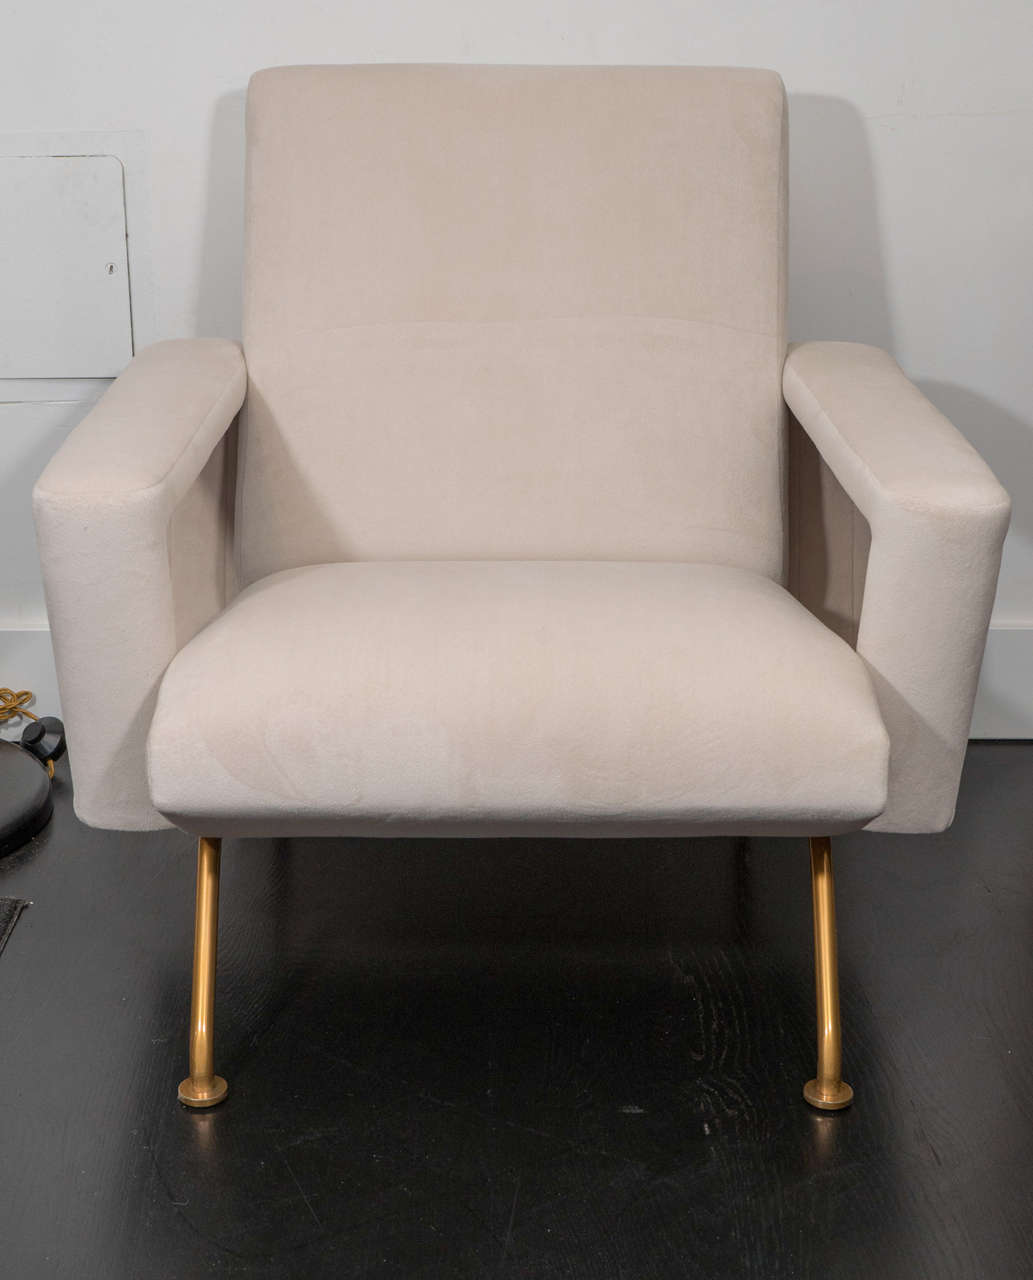 Pair of vintage French open armed chairs with brass legs. Beautiful scale and proportions. Seat H 14